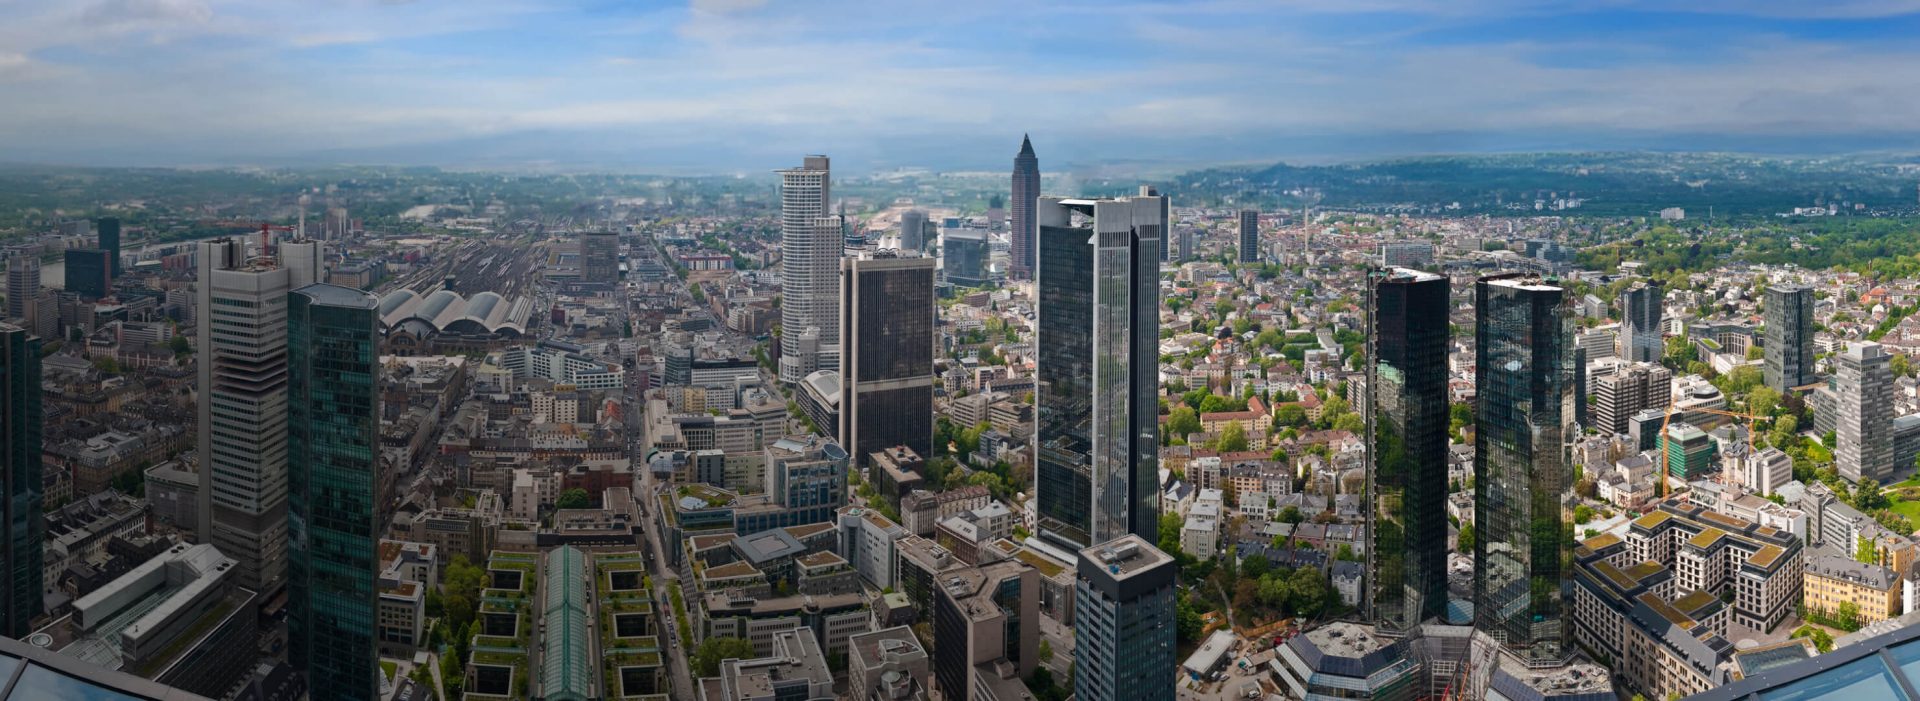 The skyline of Frankfurt am Main where the headquarters of DZ BANK are located